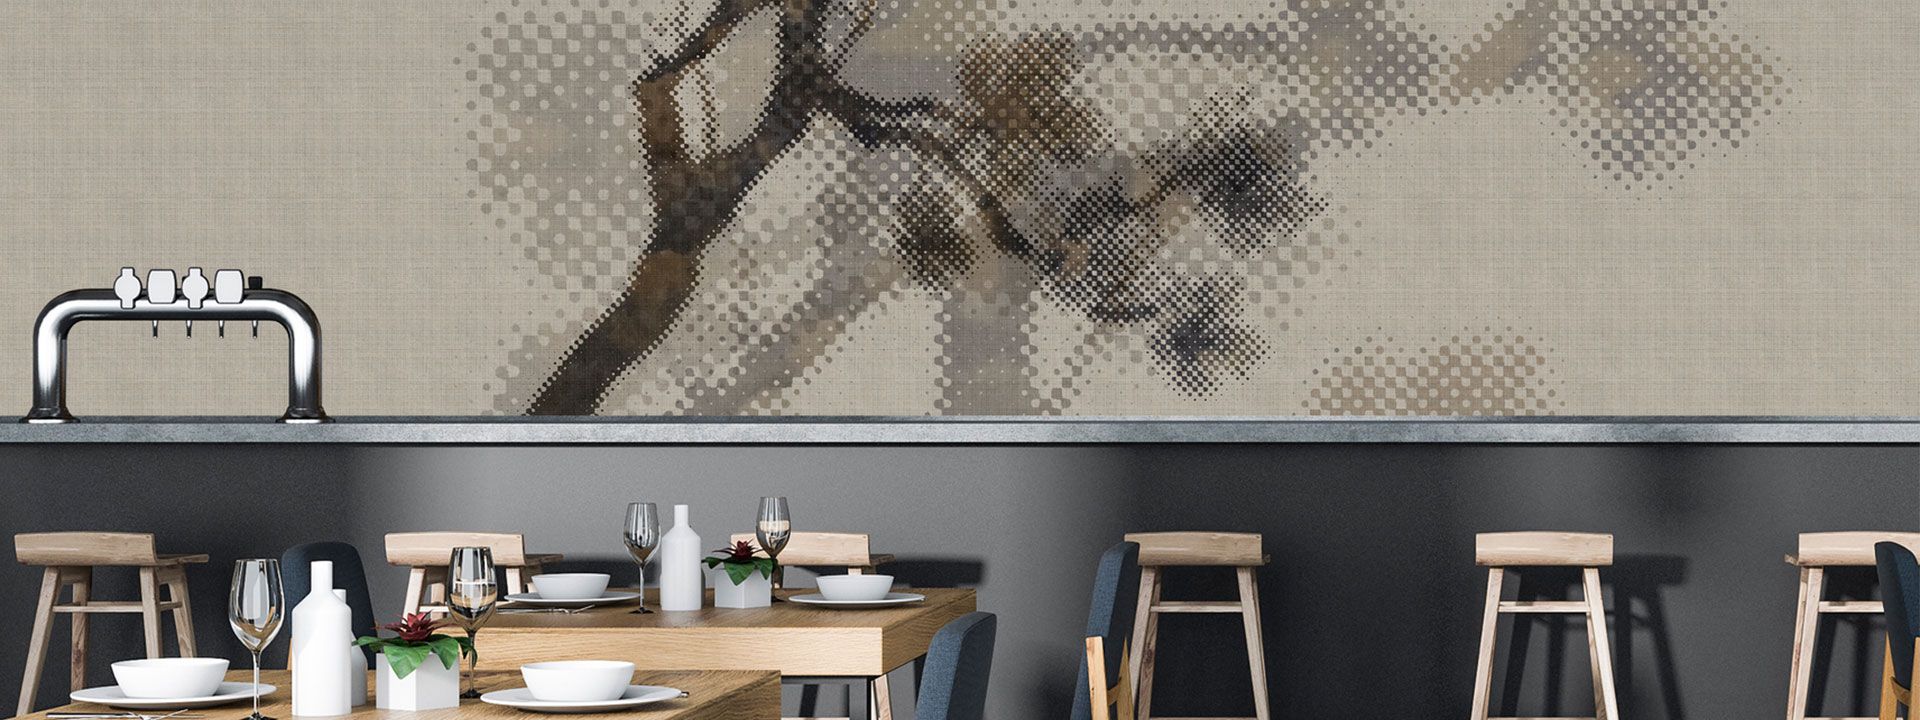 Canteen bar in front of wallpapered wall with minimalist nature design DD114197